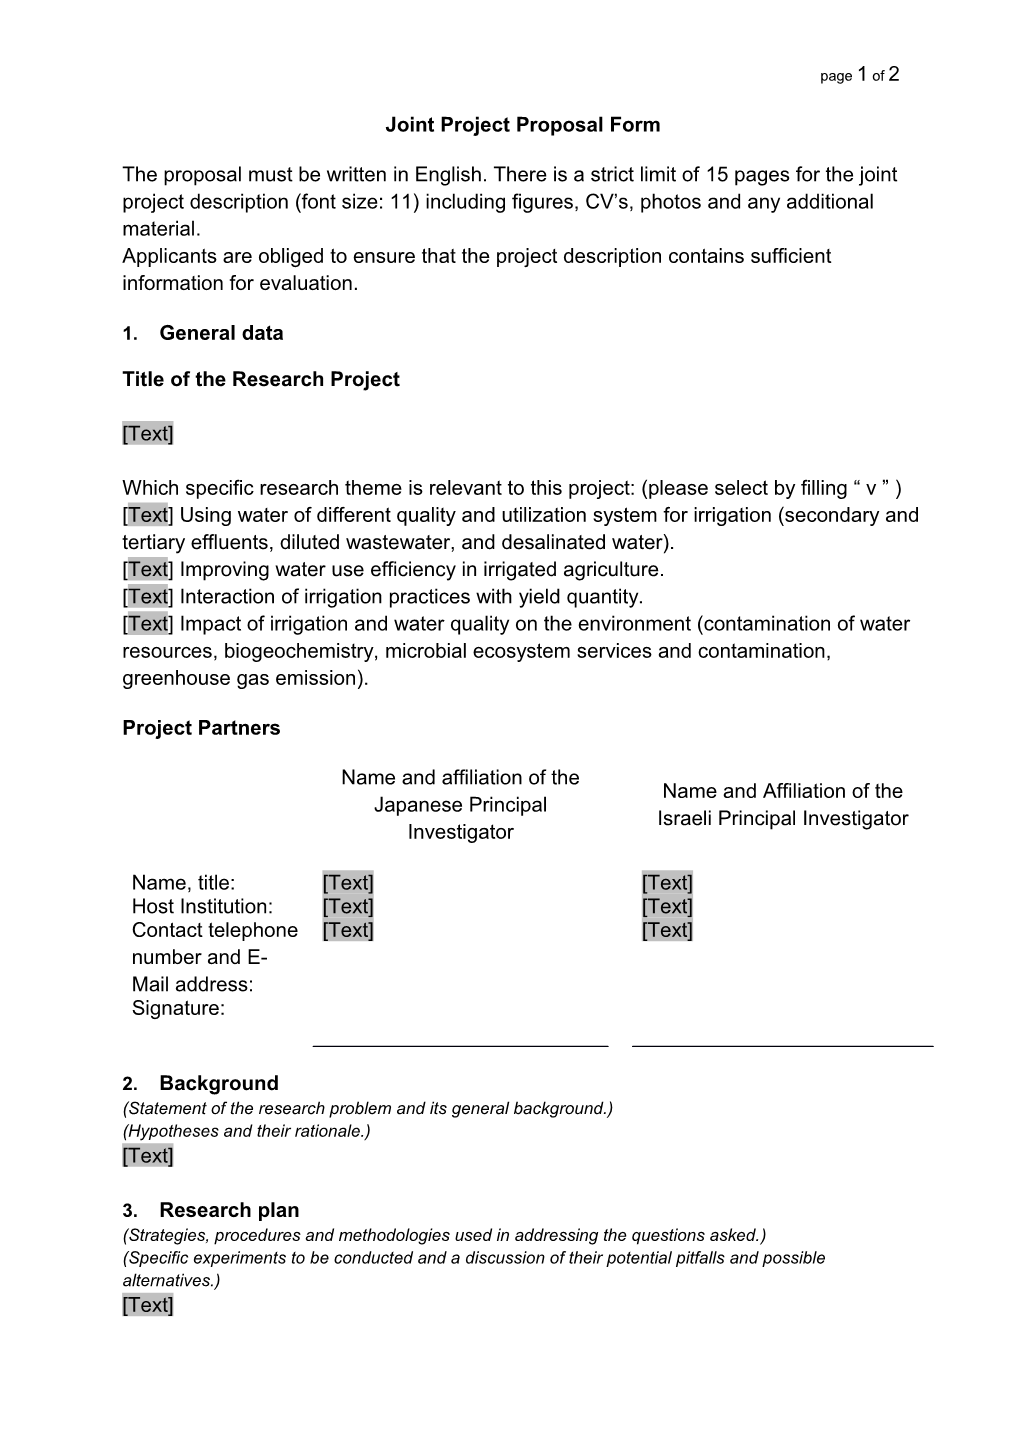 Joint Project Proposal Form